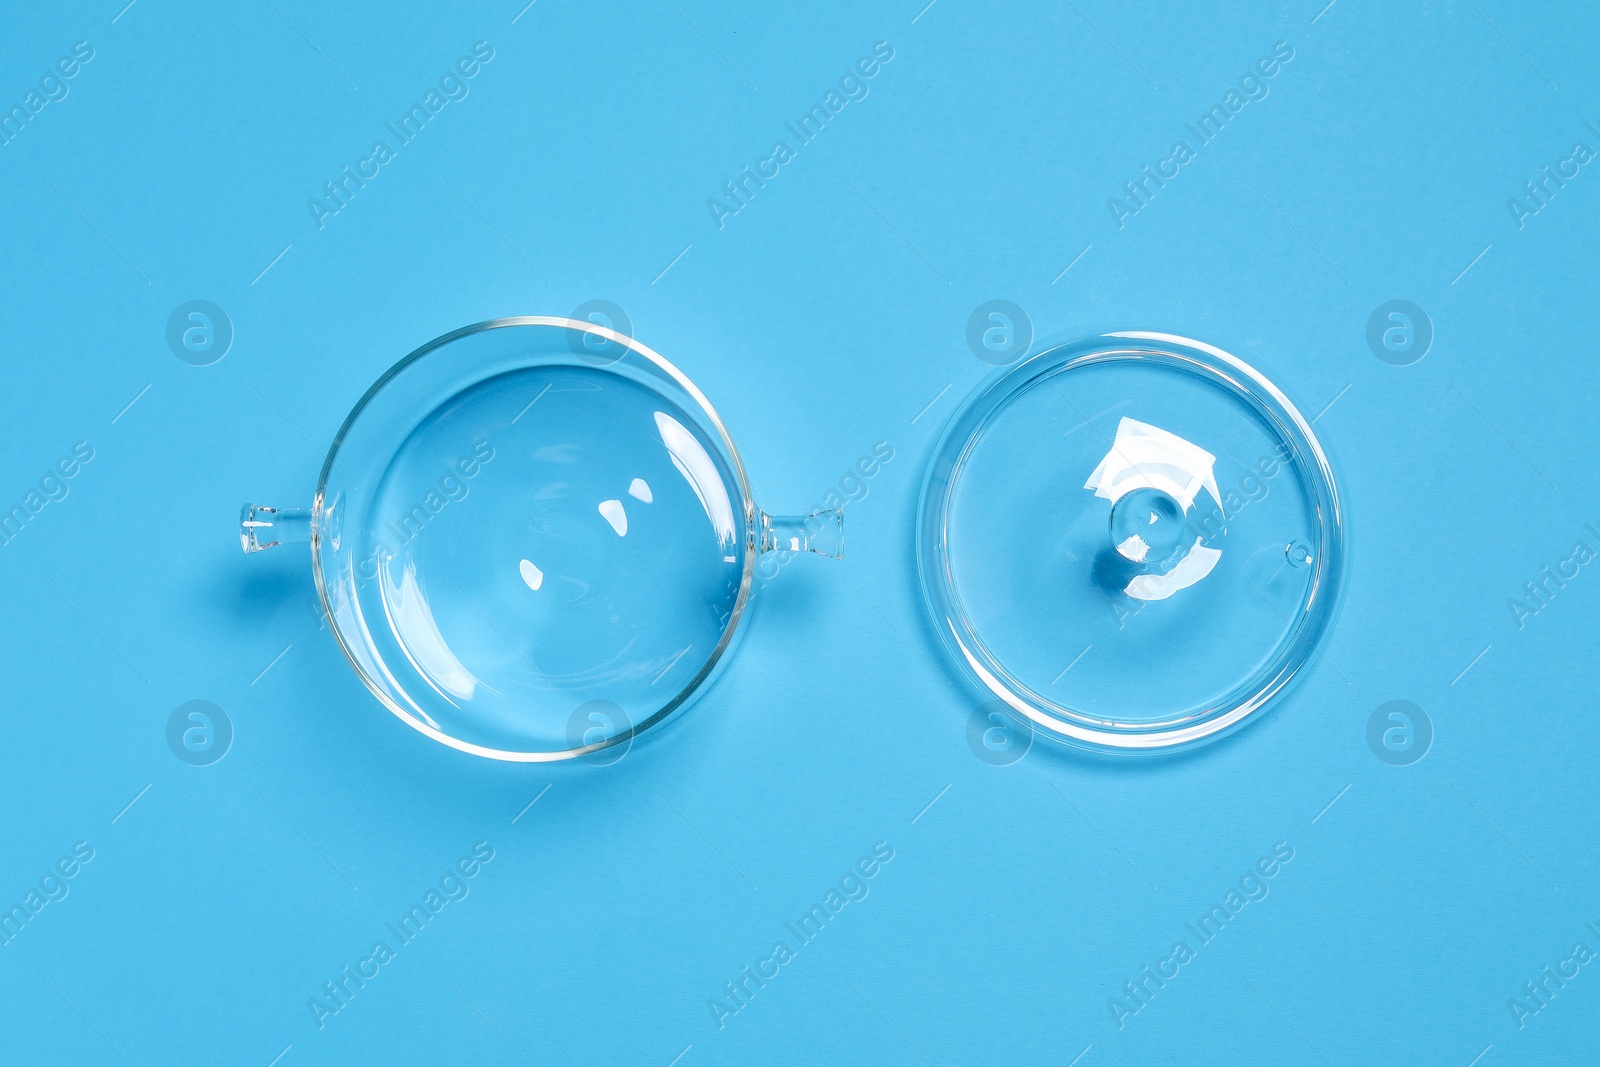 Photo of Empty glass pot and lid on light blue background, flat lay